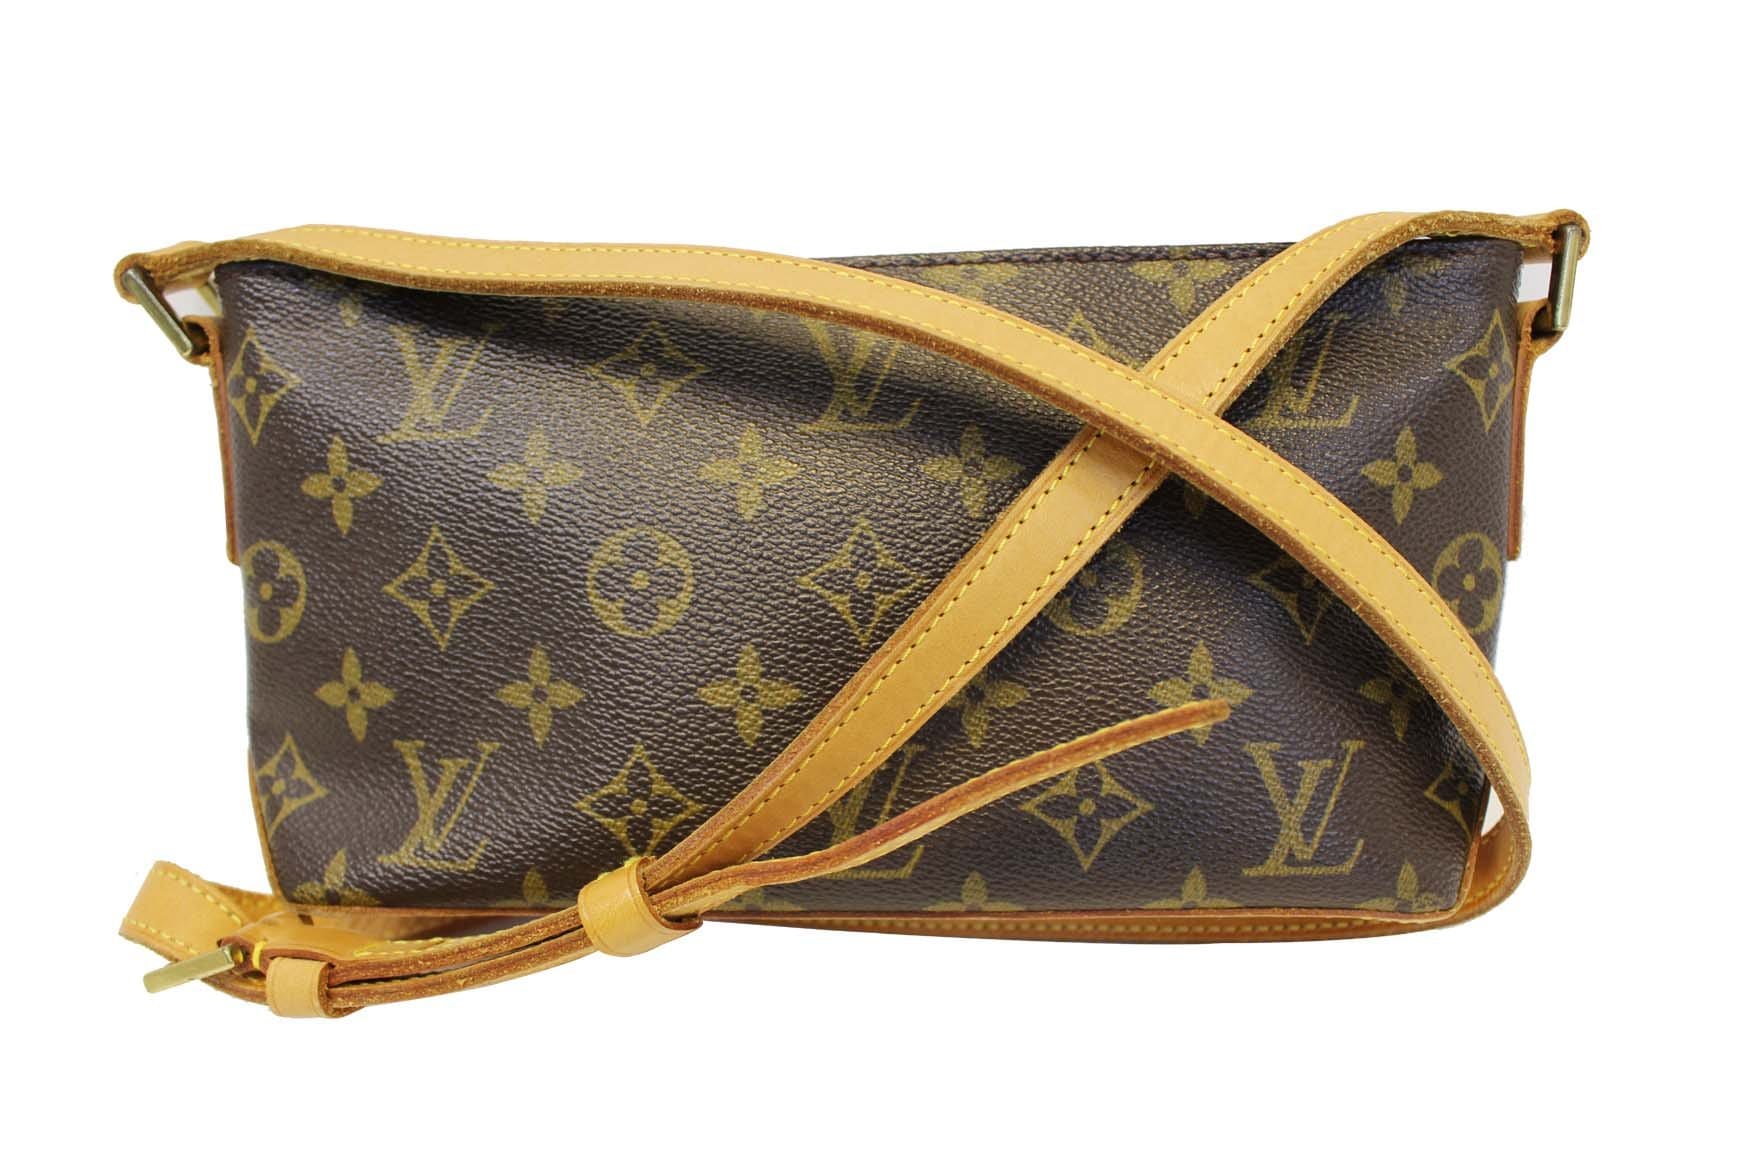 Style Exchange Boutique - Its here! Another LOUIS VUITTON Repurposed  Monogram Crossbody! 😍 NWT made from repurposed authentic Louis Vuitton  Canvas! Only four payments of $70 if you checkout using our #afterpay